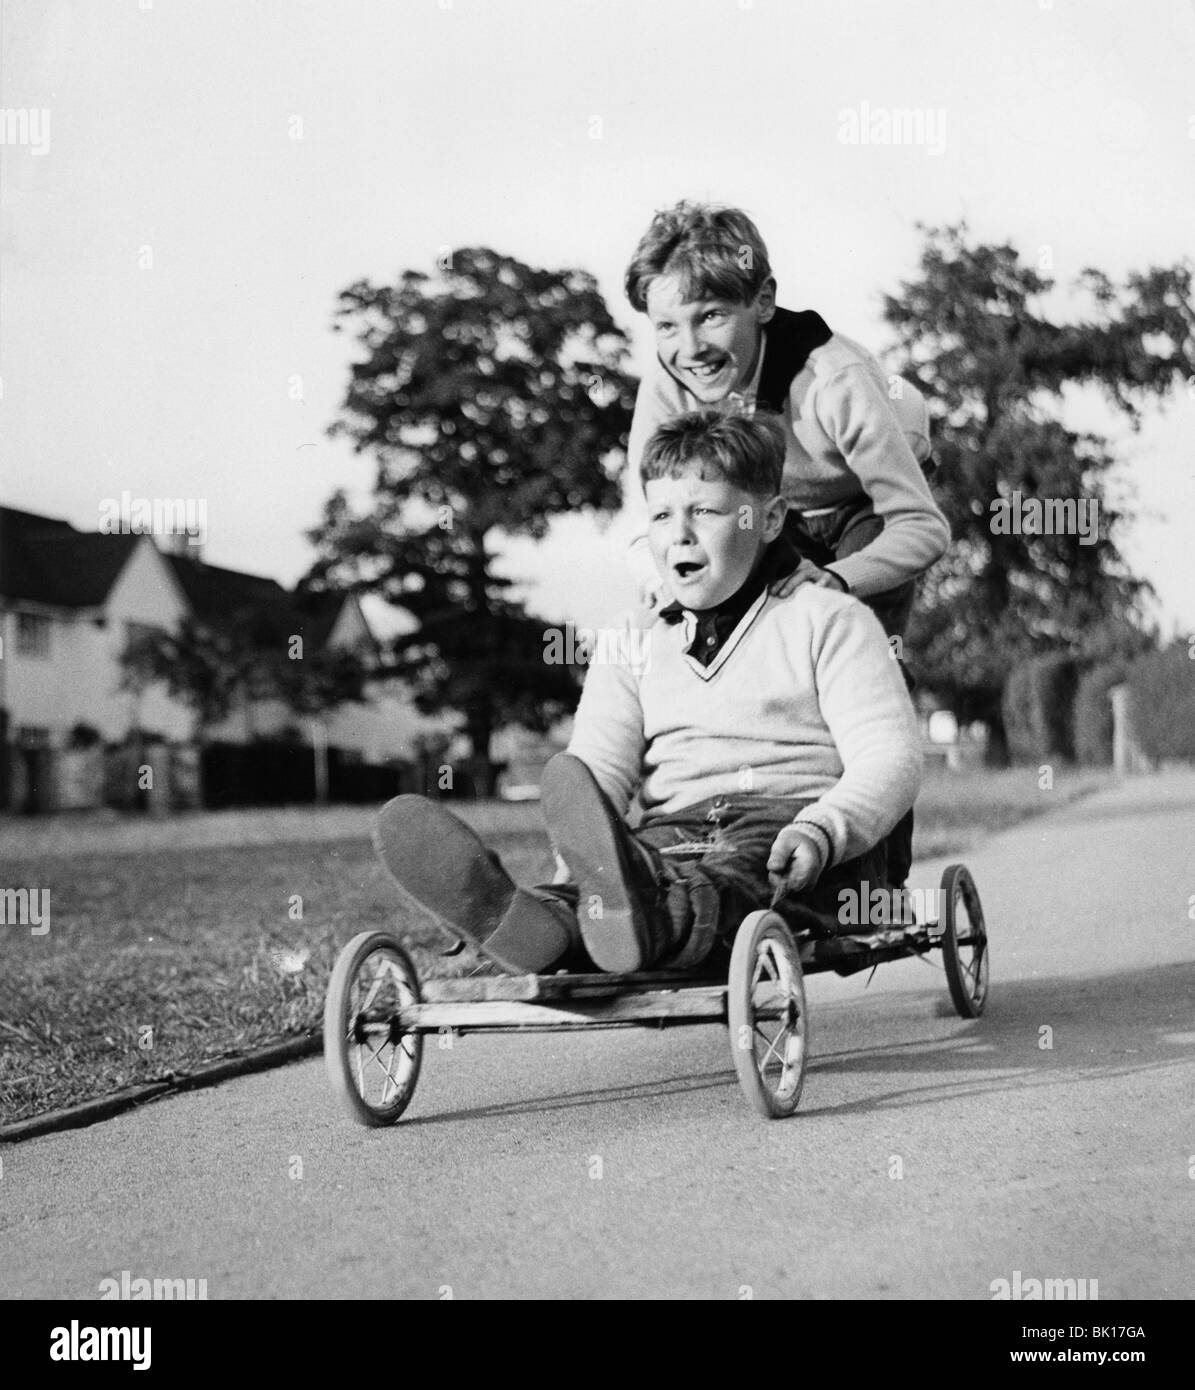 Boys playing with a home-made go-kart, Horley, Surrey, 1965. Stock Photo